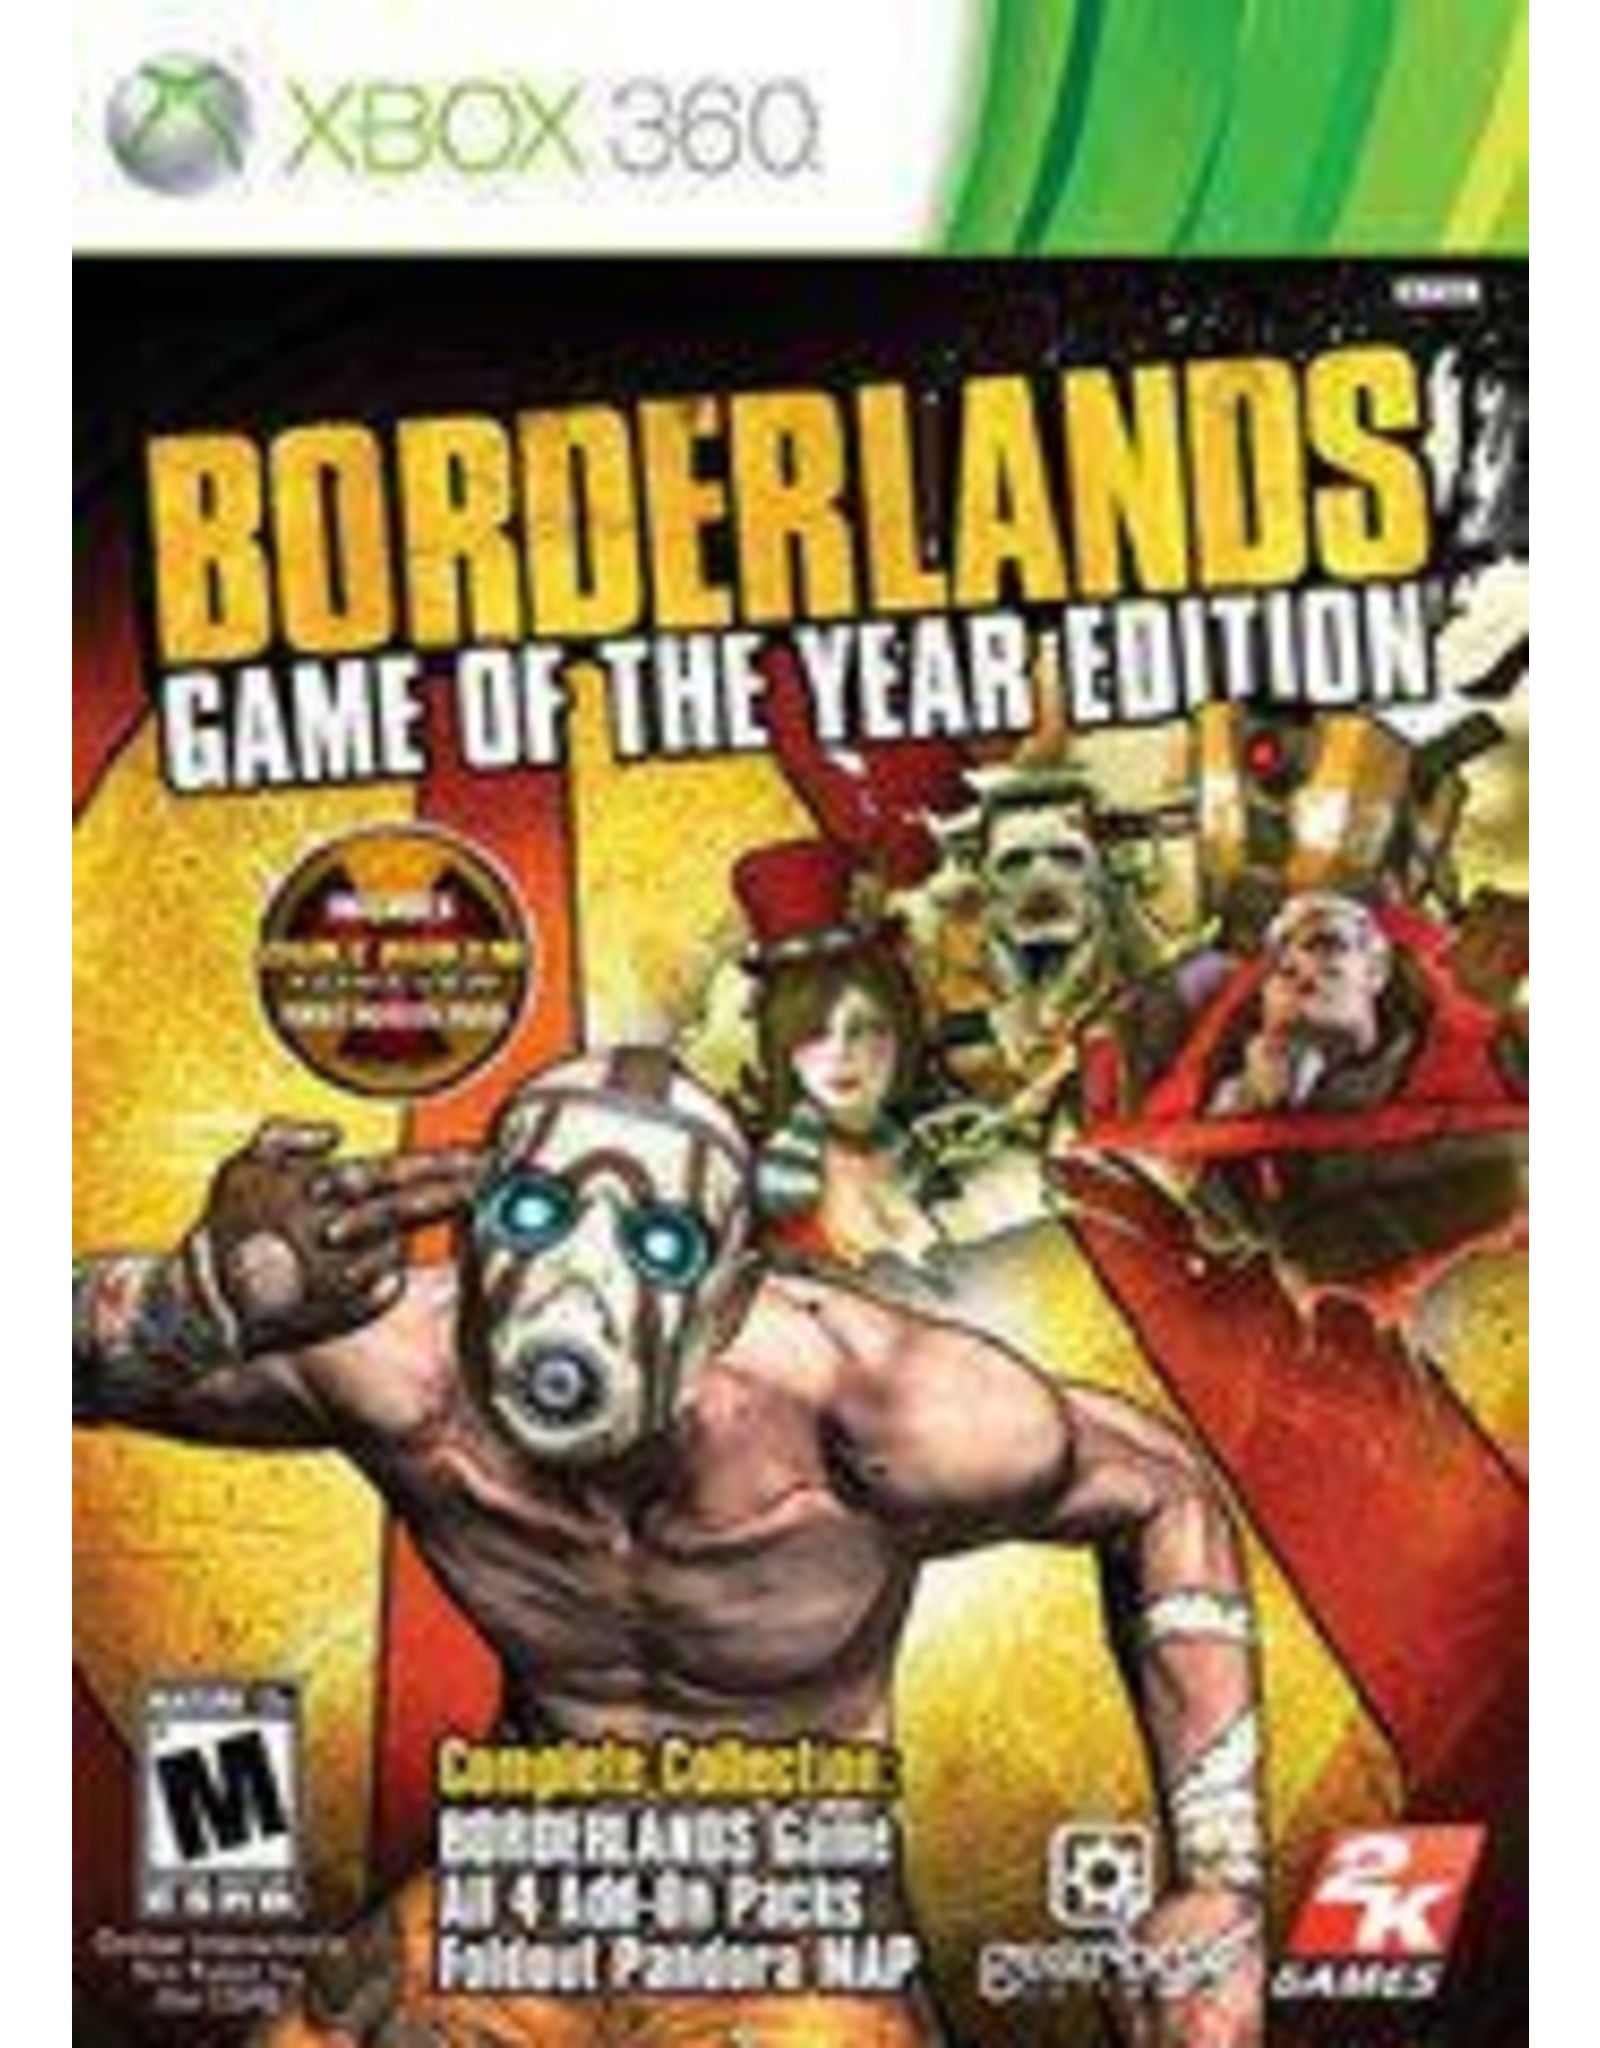 Xbox 360 Borderlands Game of the Year Edition (CiB, No Map)